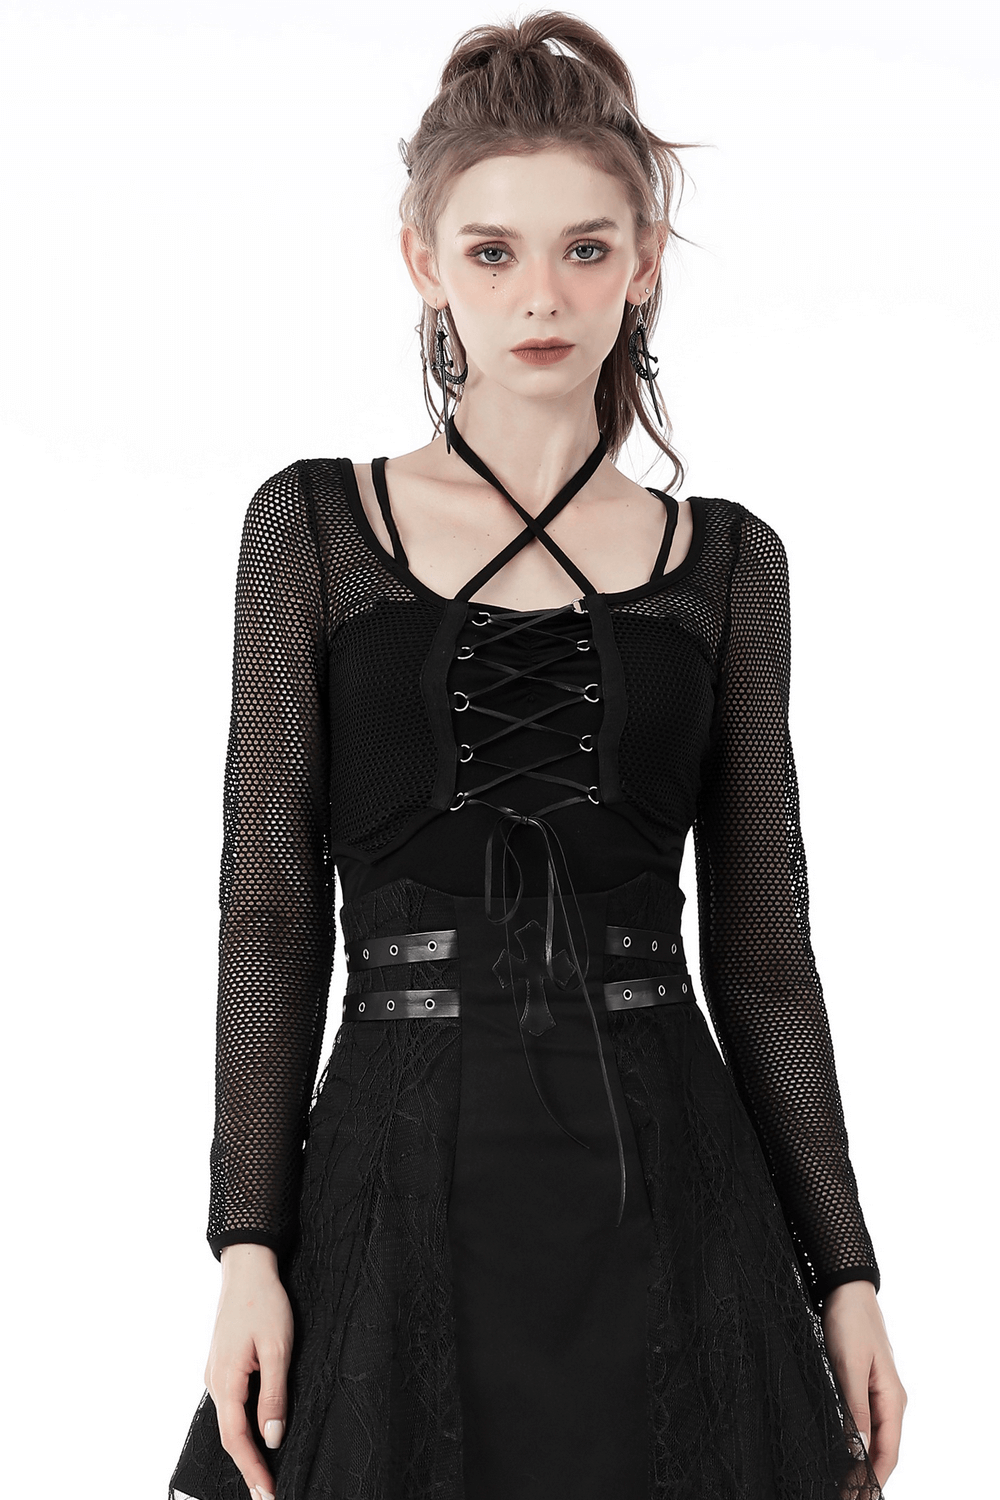 Female Mesh Gothic Crop Top with Long Sleeves